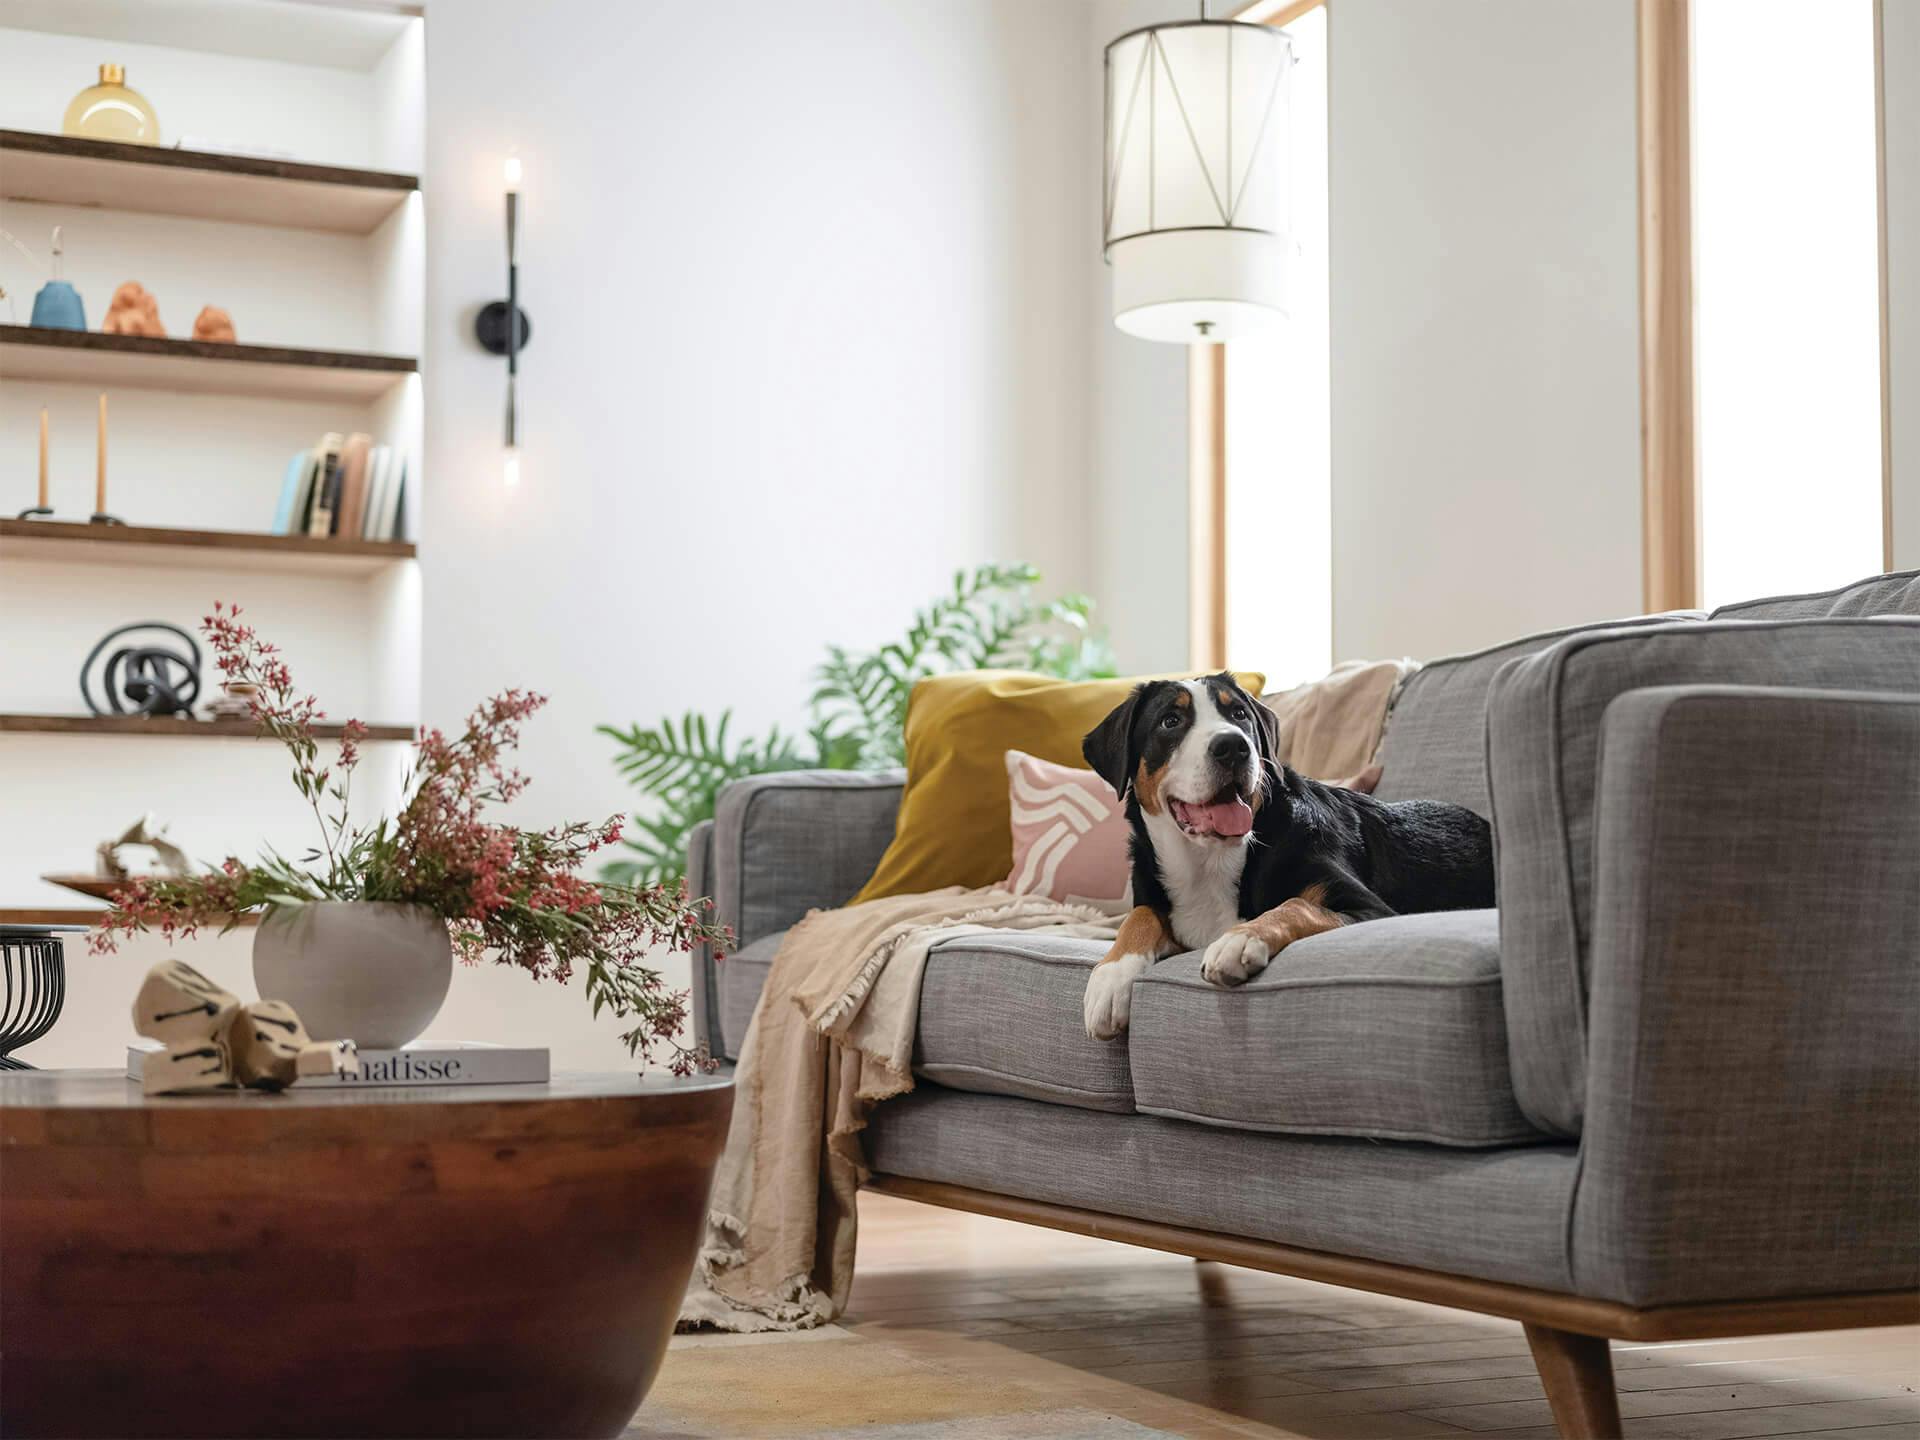 Living room featuring a dog on a couch with a Birkleigh pendant above and a Branches sconce shining on the wall behind it